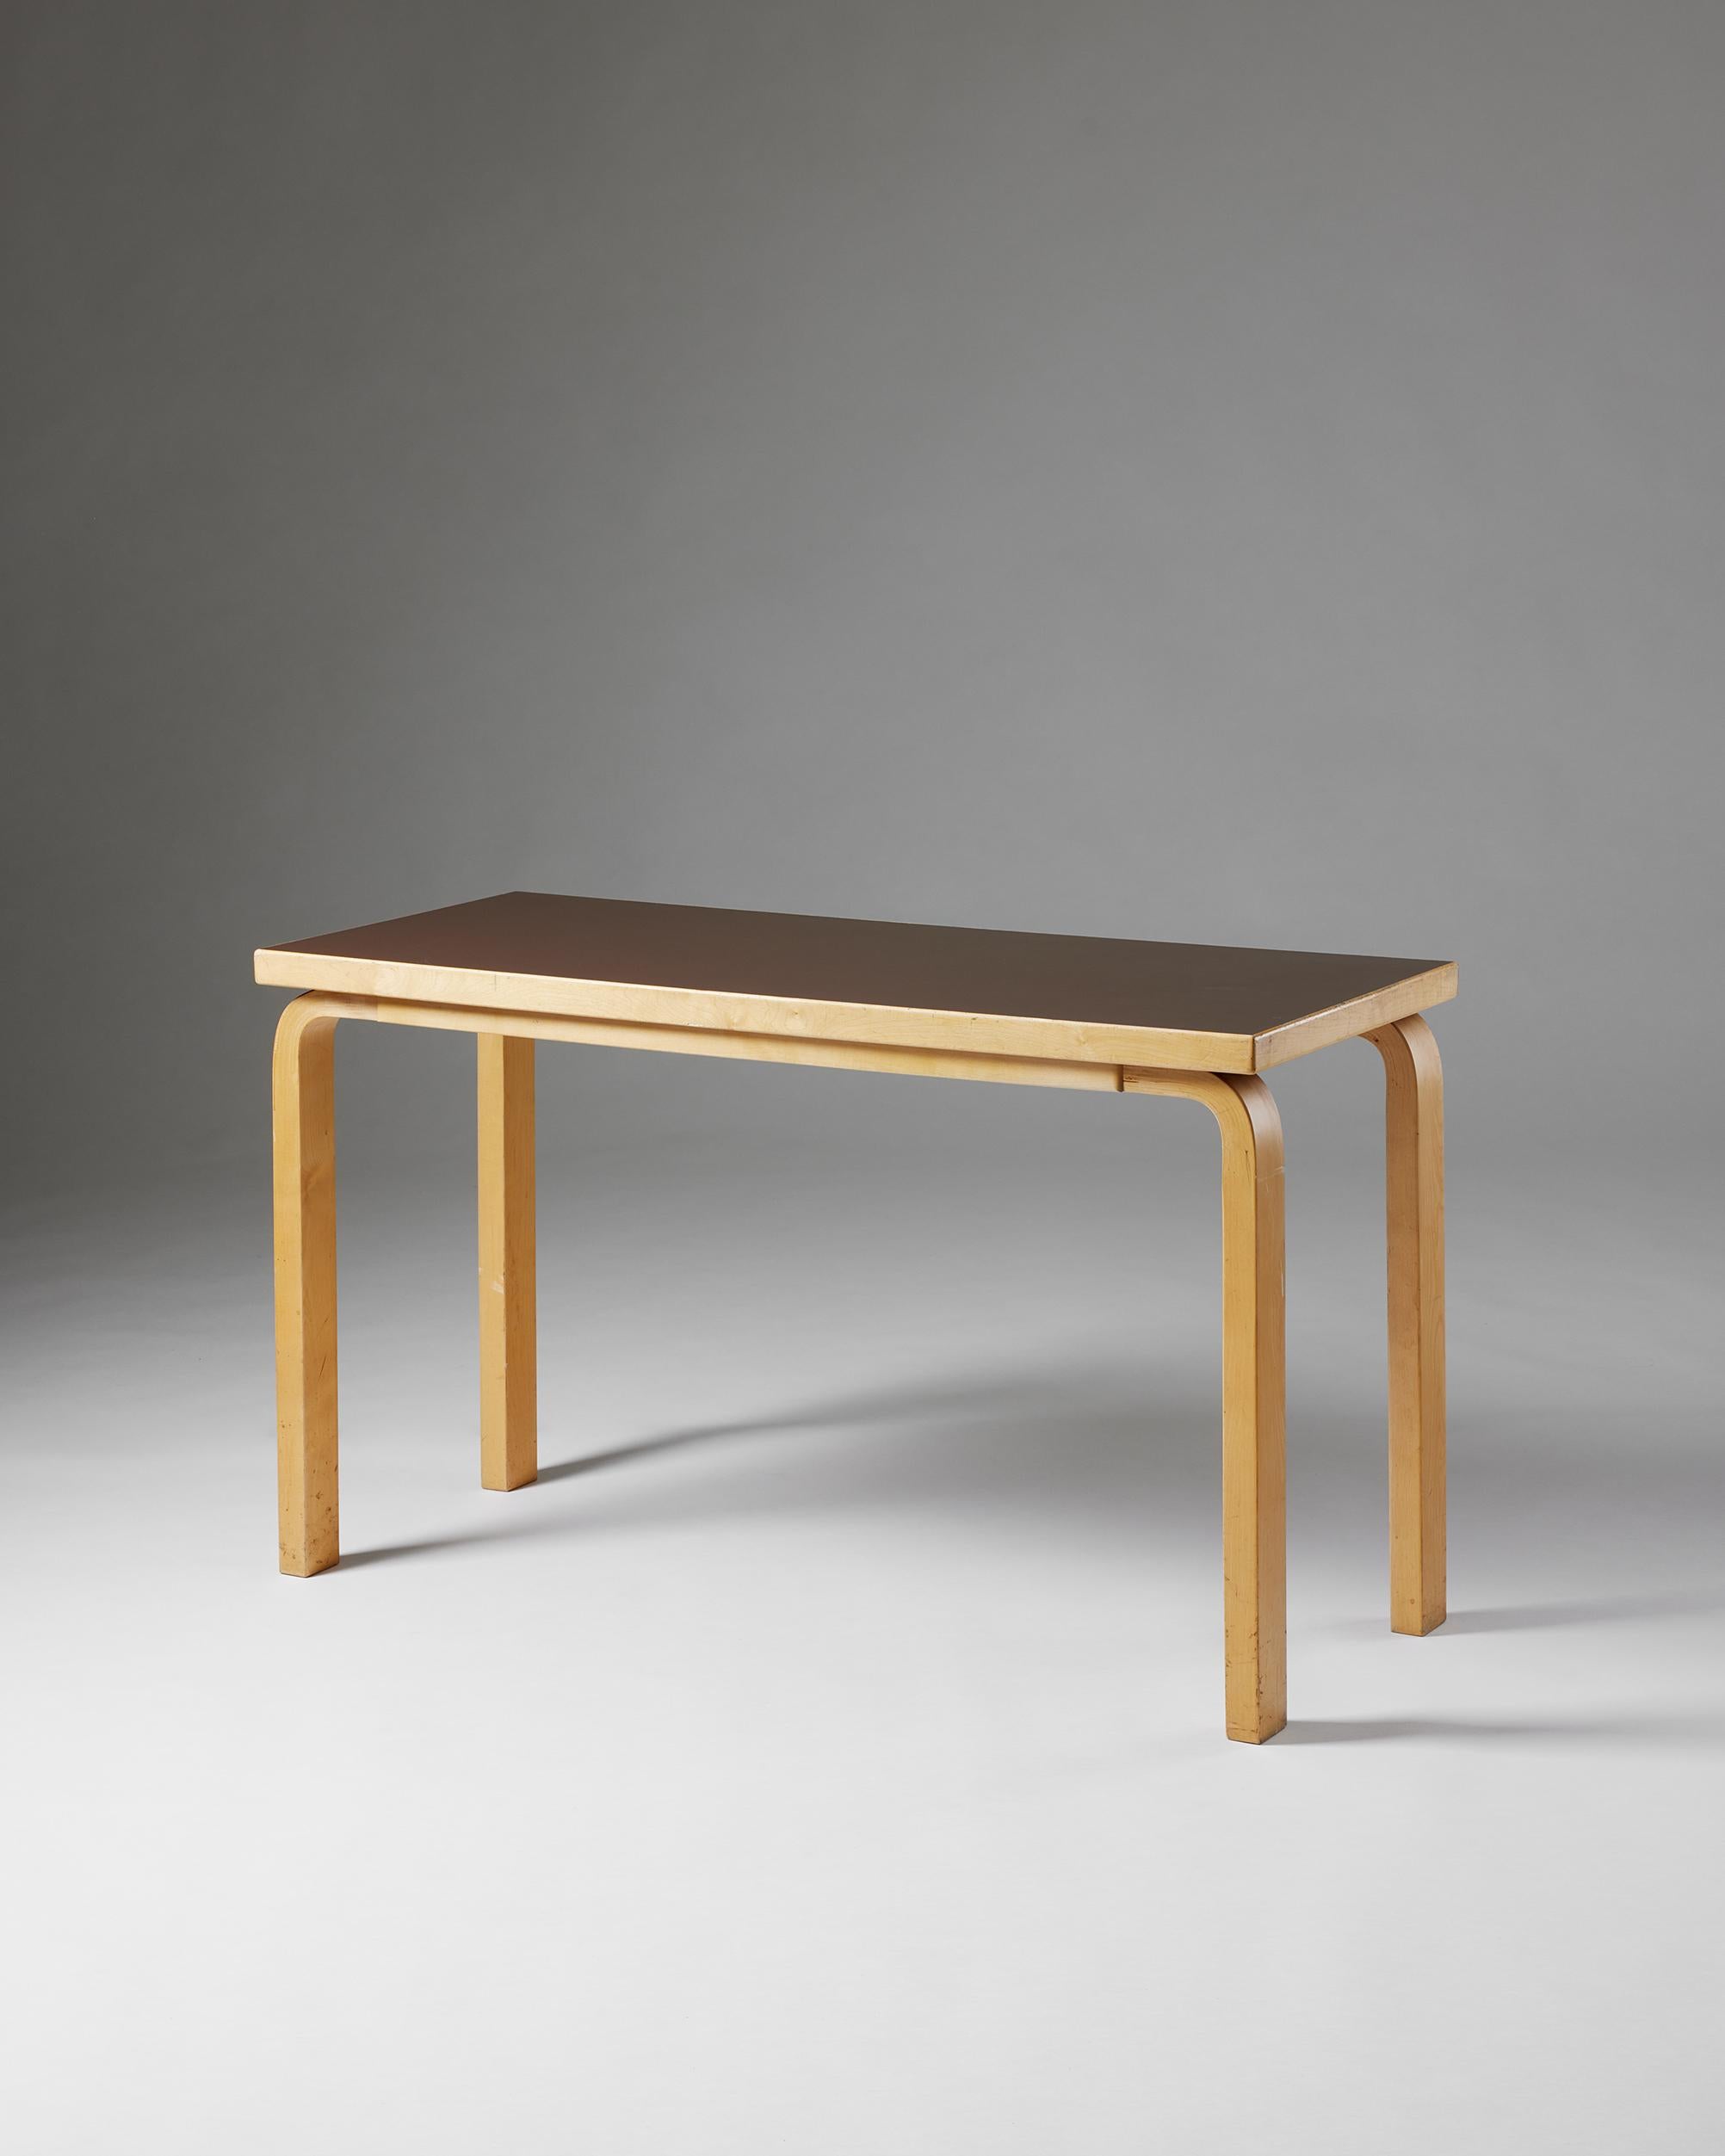 Table designed by Alvar Aalto for Artek,
Finland, 1970s.

Lacquered birch and laminate.

Alvar Aalto was a Finnish architect and designer. His work includes architecture, furniture, lighting, and glassware, as well as sculptures and paintings. He